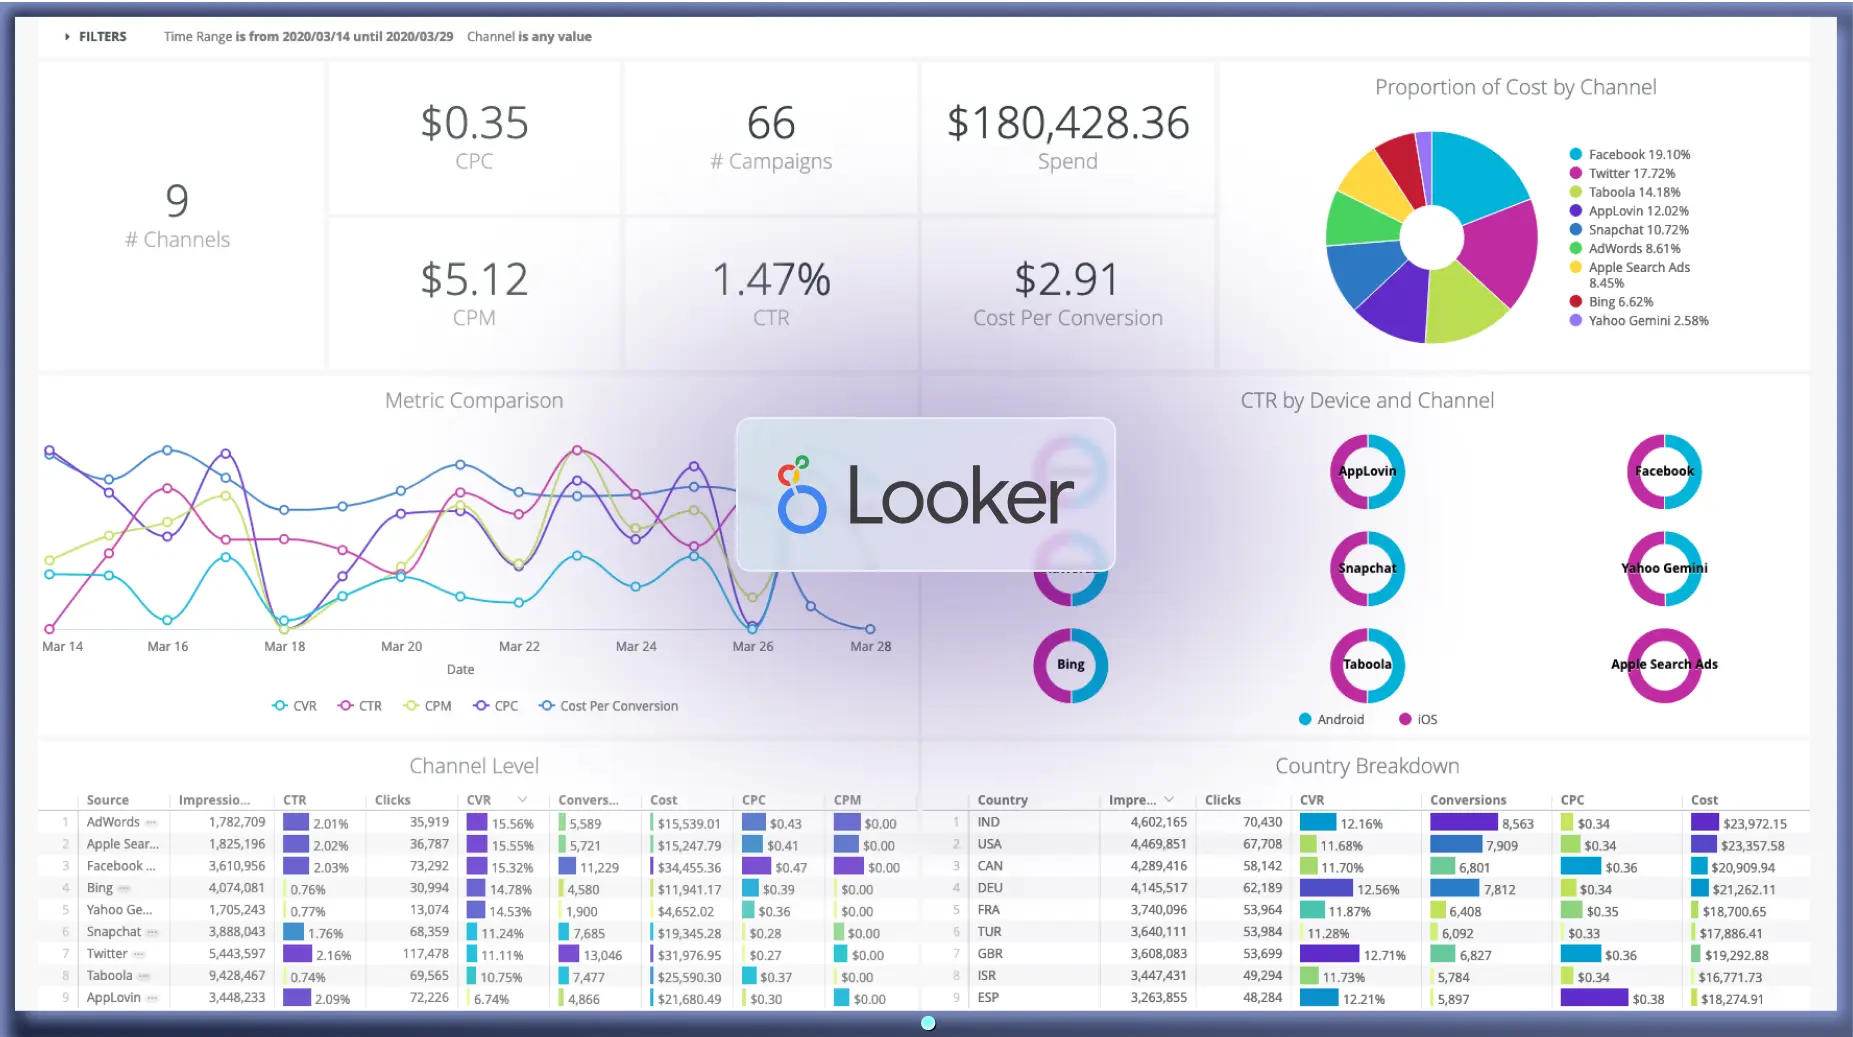 A Looker dashboard is showing on a TV screen